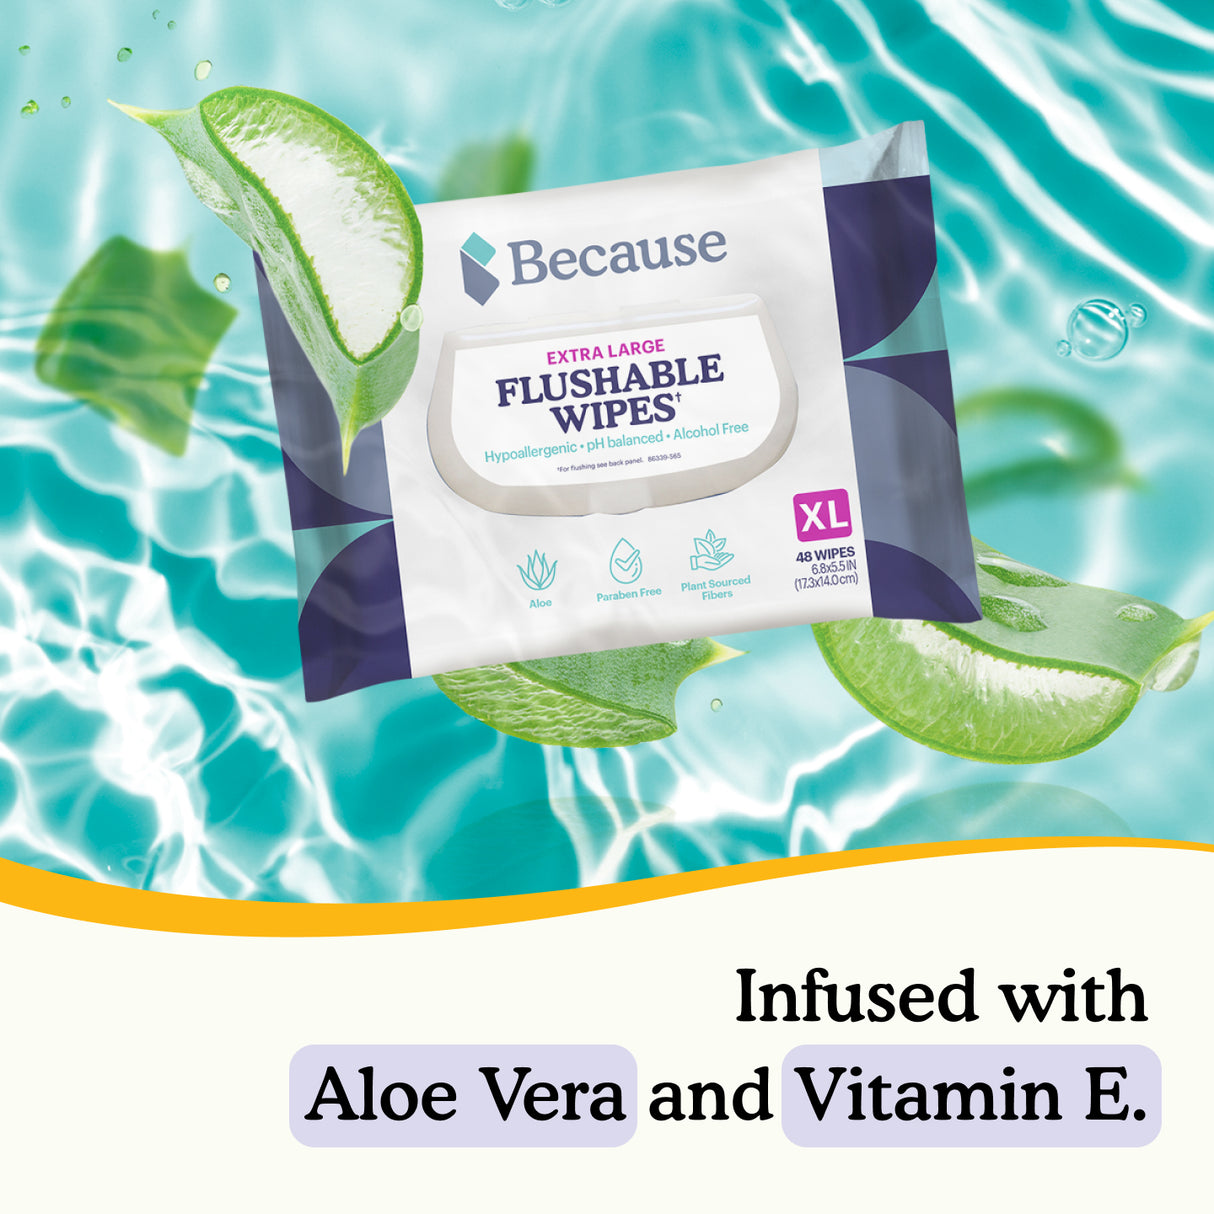 Flushable wipes package infused with aloe vera and vitamin E.